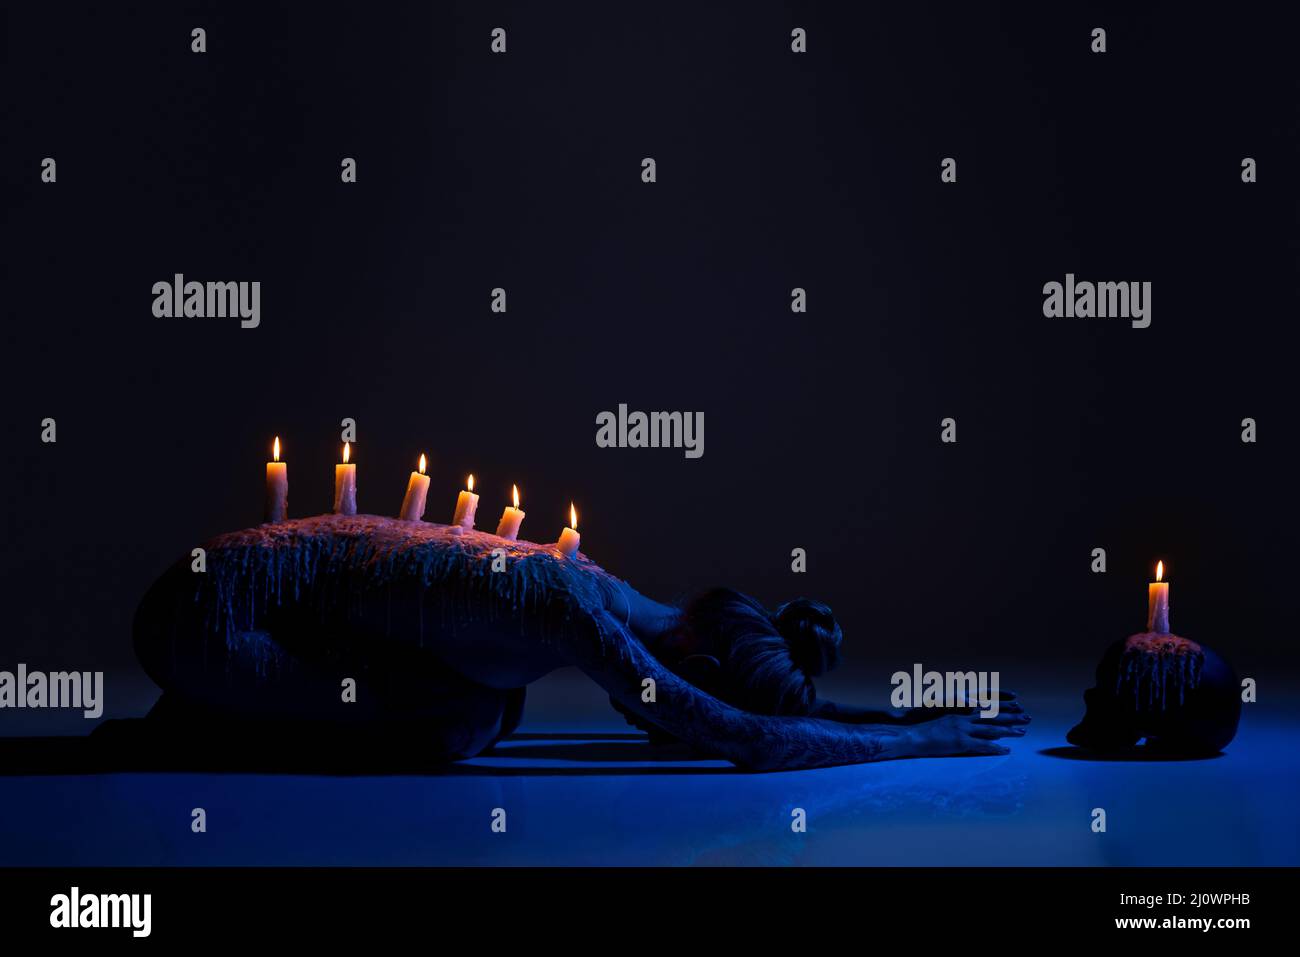 Burning candles on back of lady bowing down in darkness Stock Photo